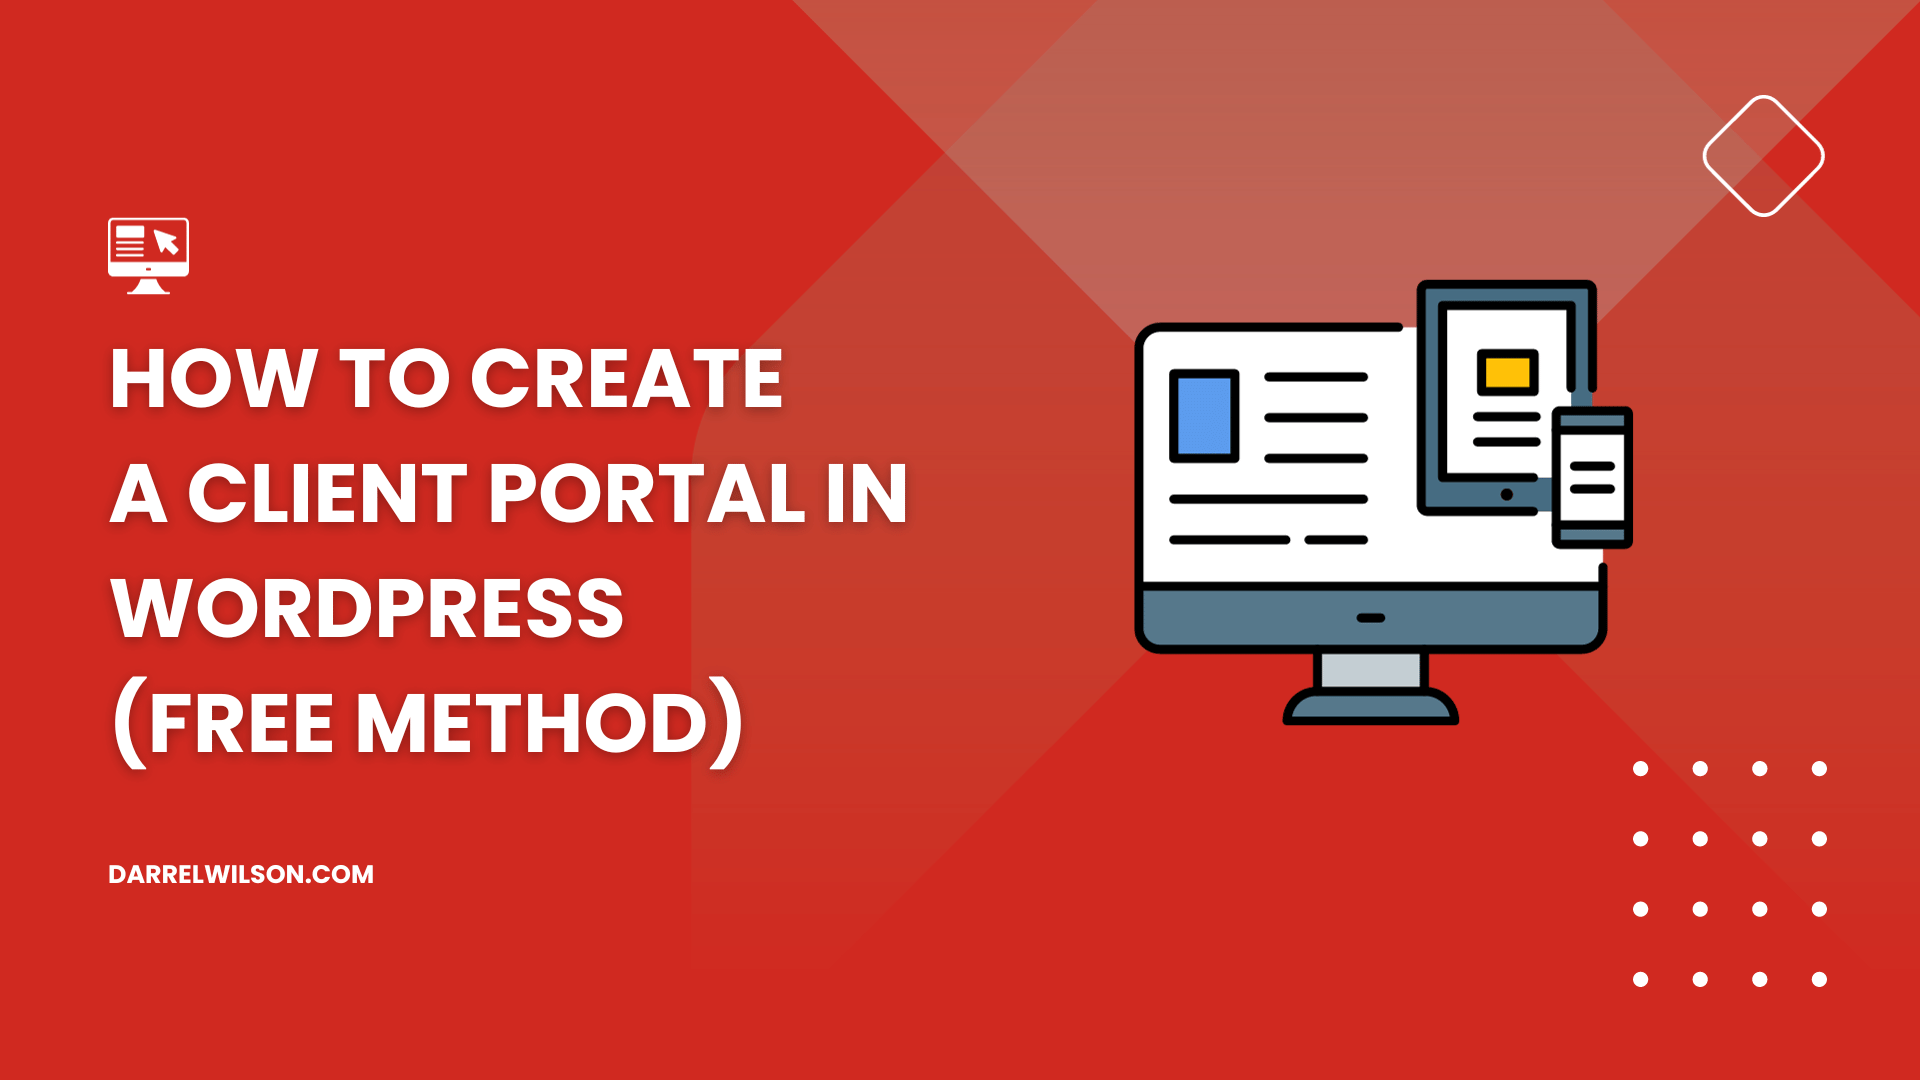 How to Create a Client Portal in WordPress (Free Method)